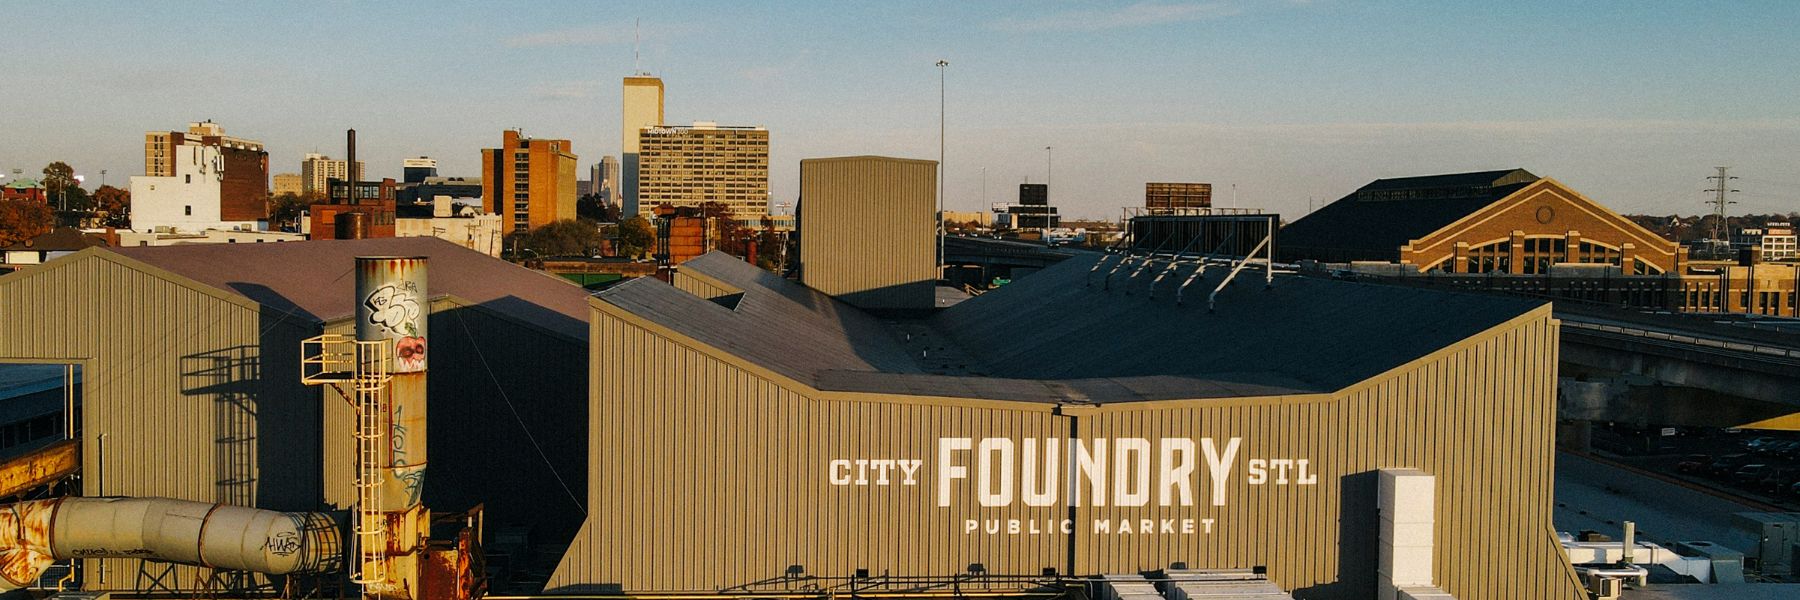 City Foundry STL is an entertainment district in Midtown.